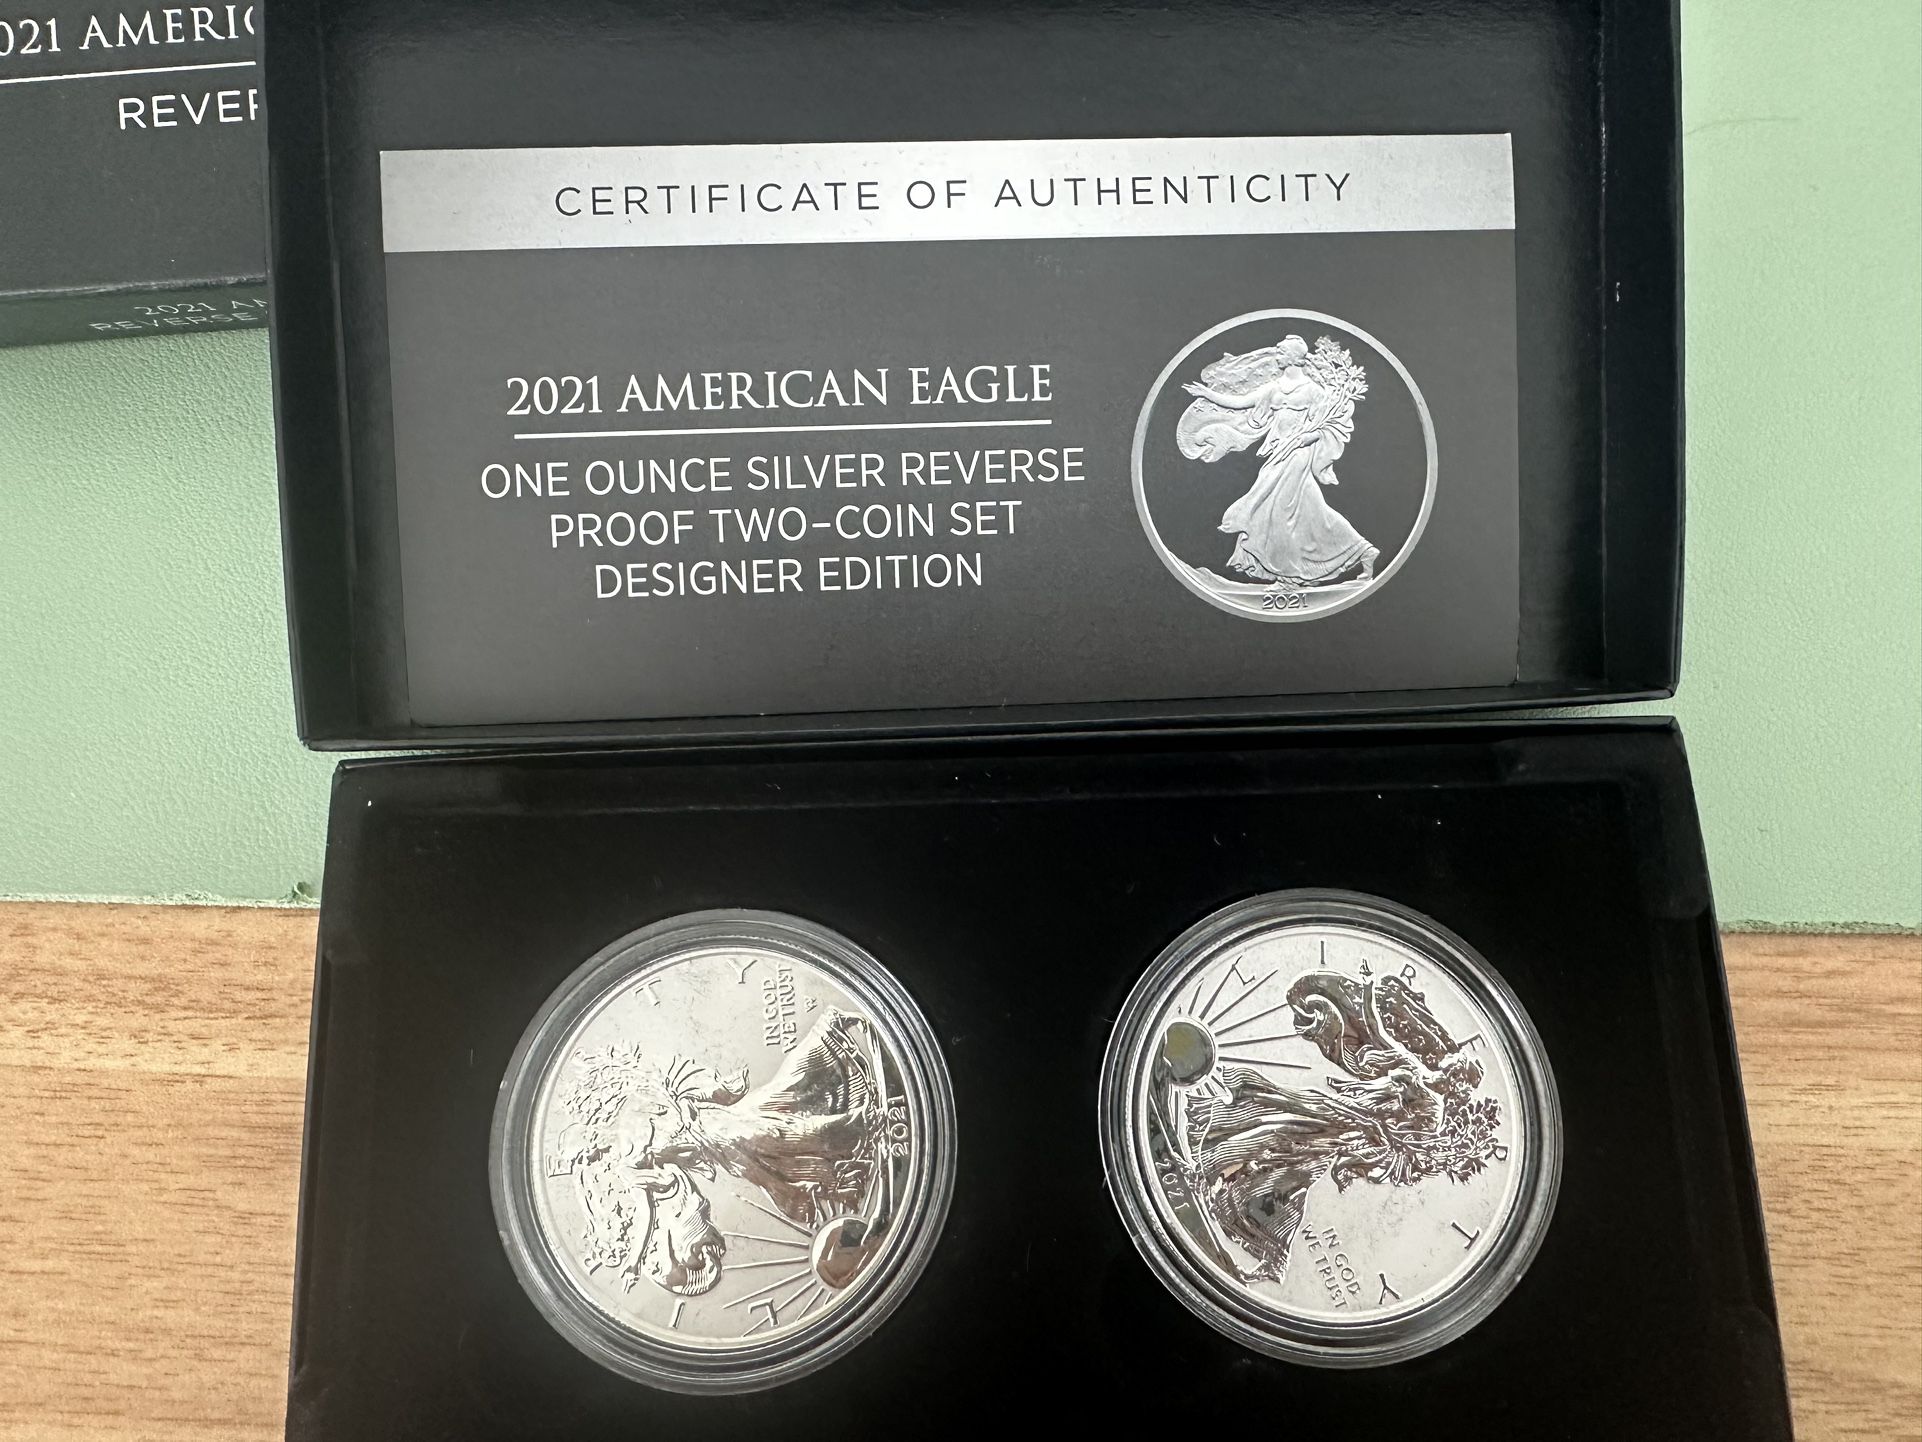 2021 American Silver Eagle One Ounce Reverse Proof Two-Coin Set Designer Edition